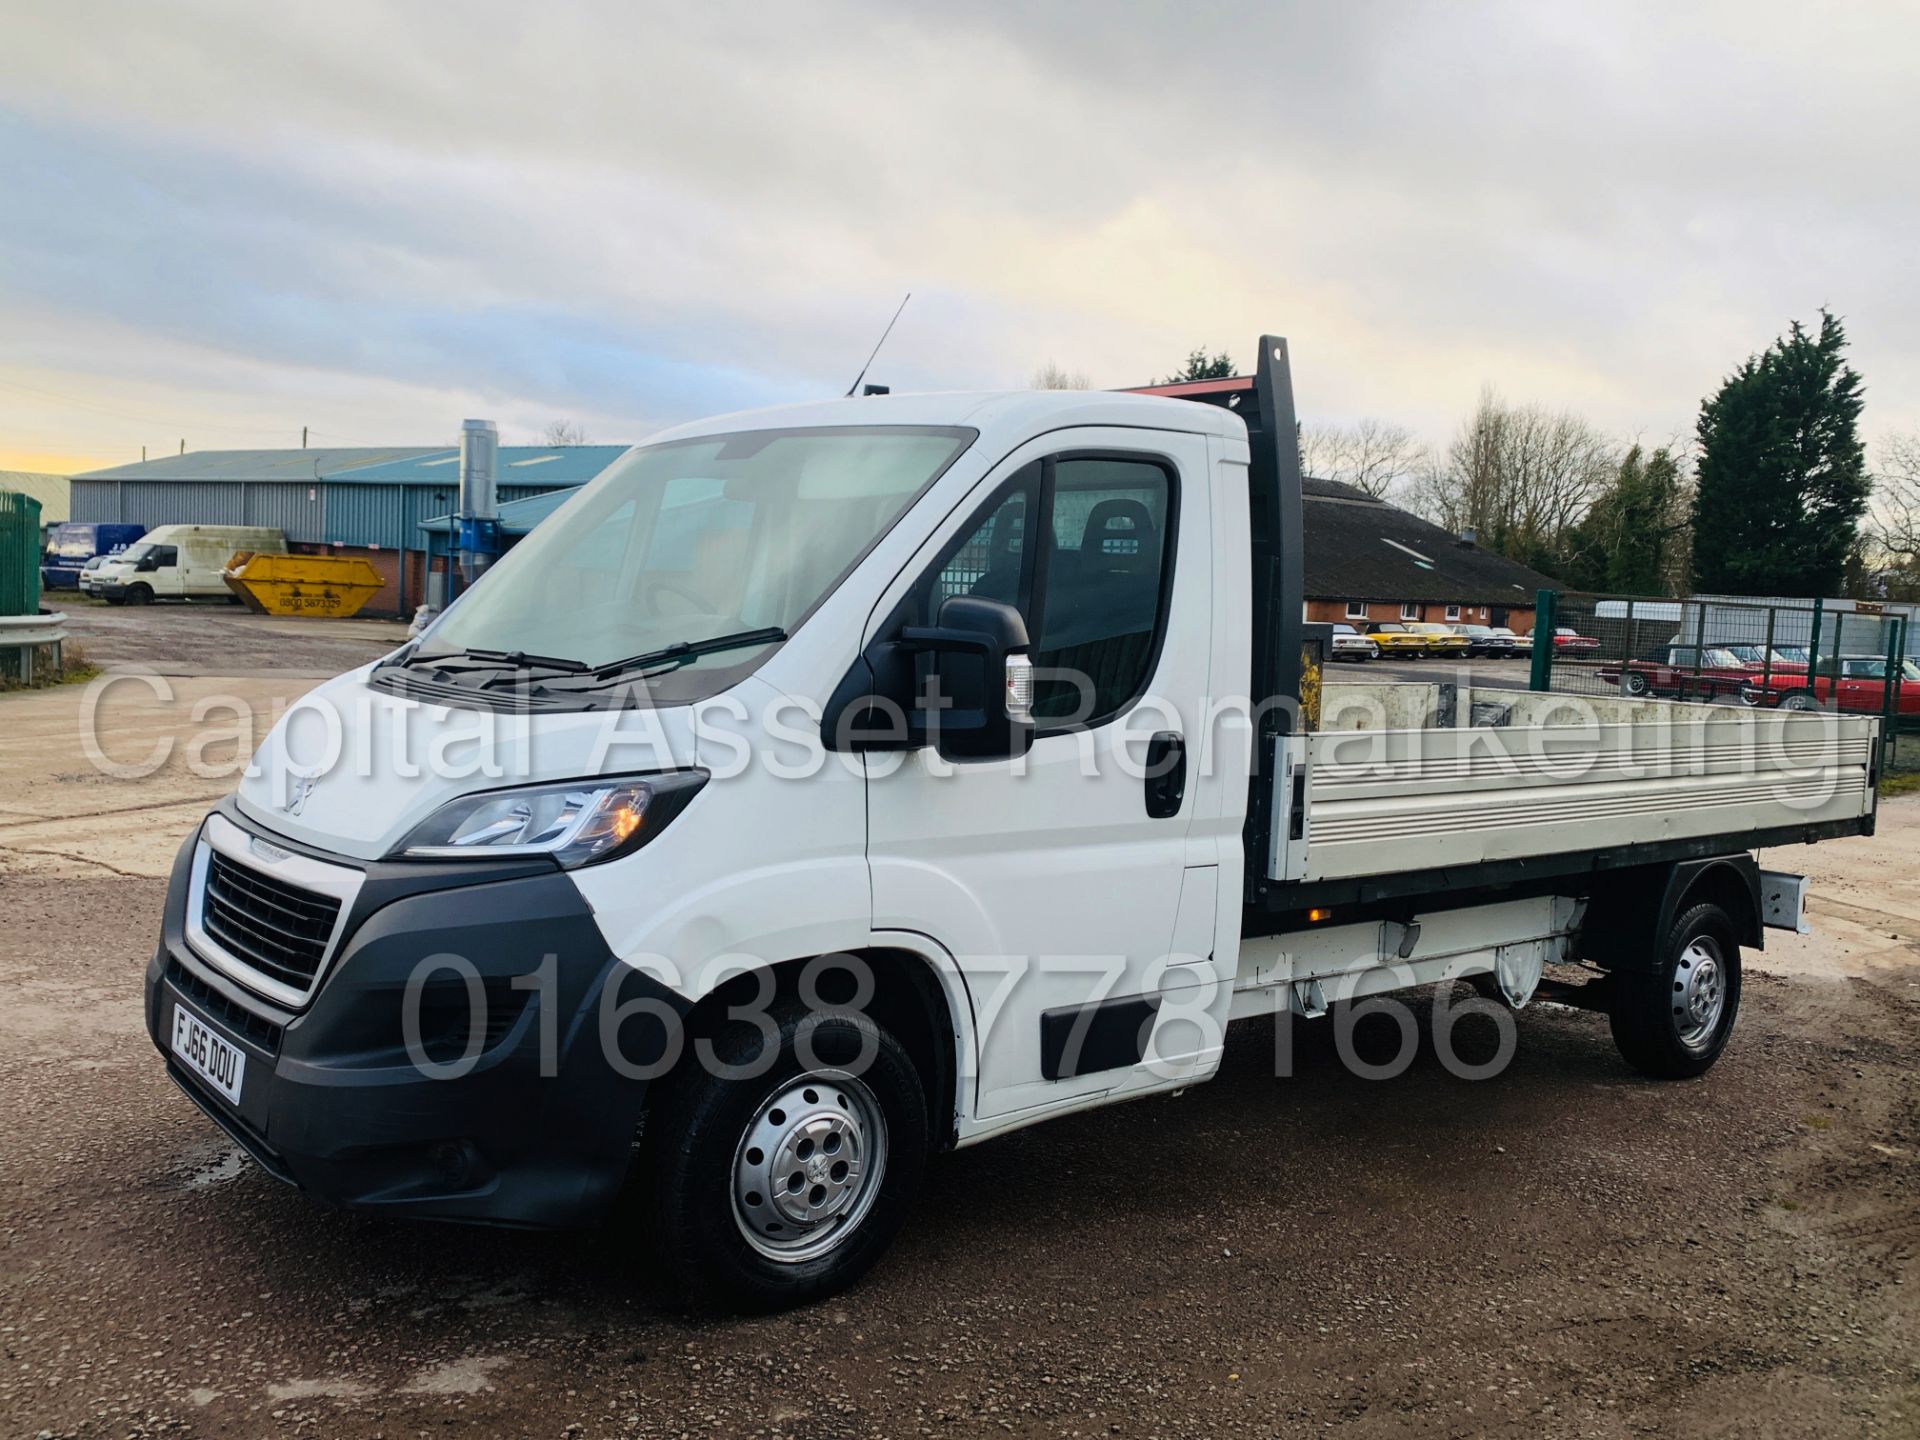 PEUGEOT BOXER *LWB - DROPSIDE TRUCK* (2017 - EURO 6 MODEL) '2.0 HDI - 6 SPEED' *ONLY 45,000 MILES* - Image 7 of 35